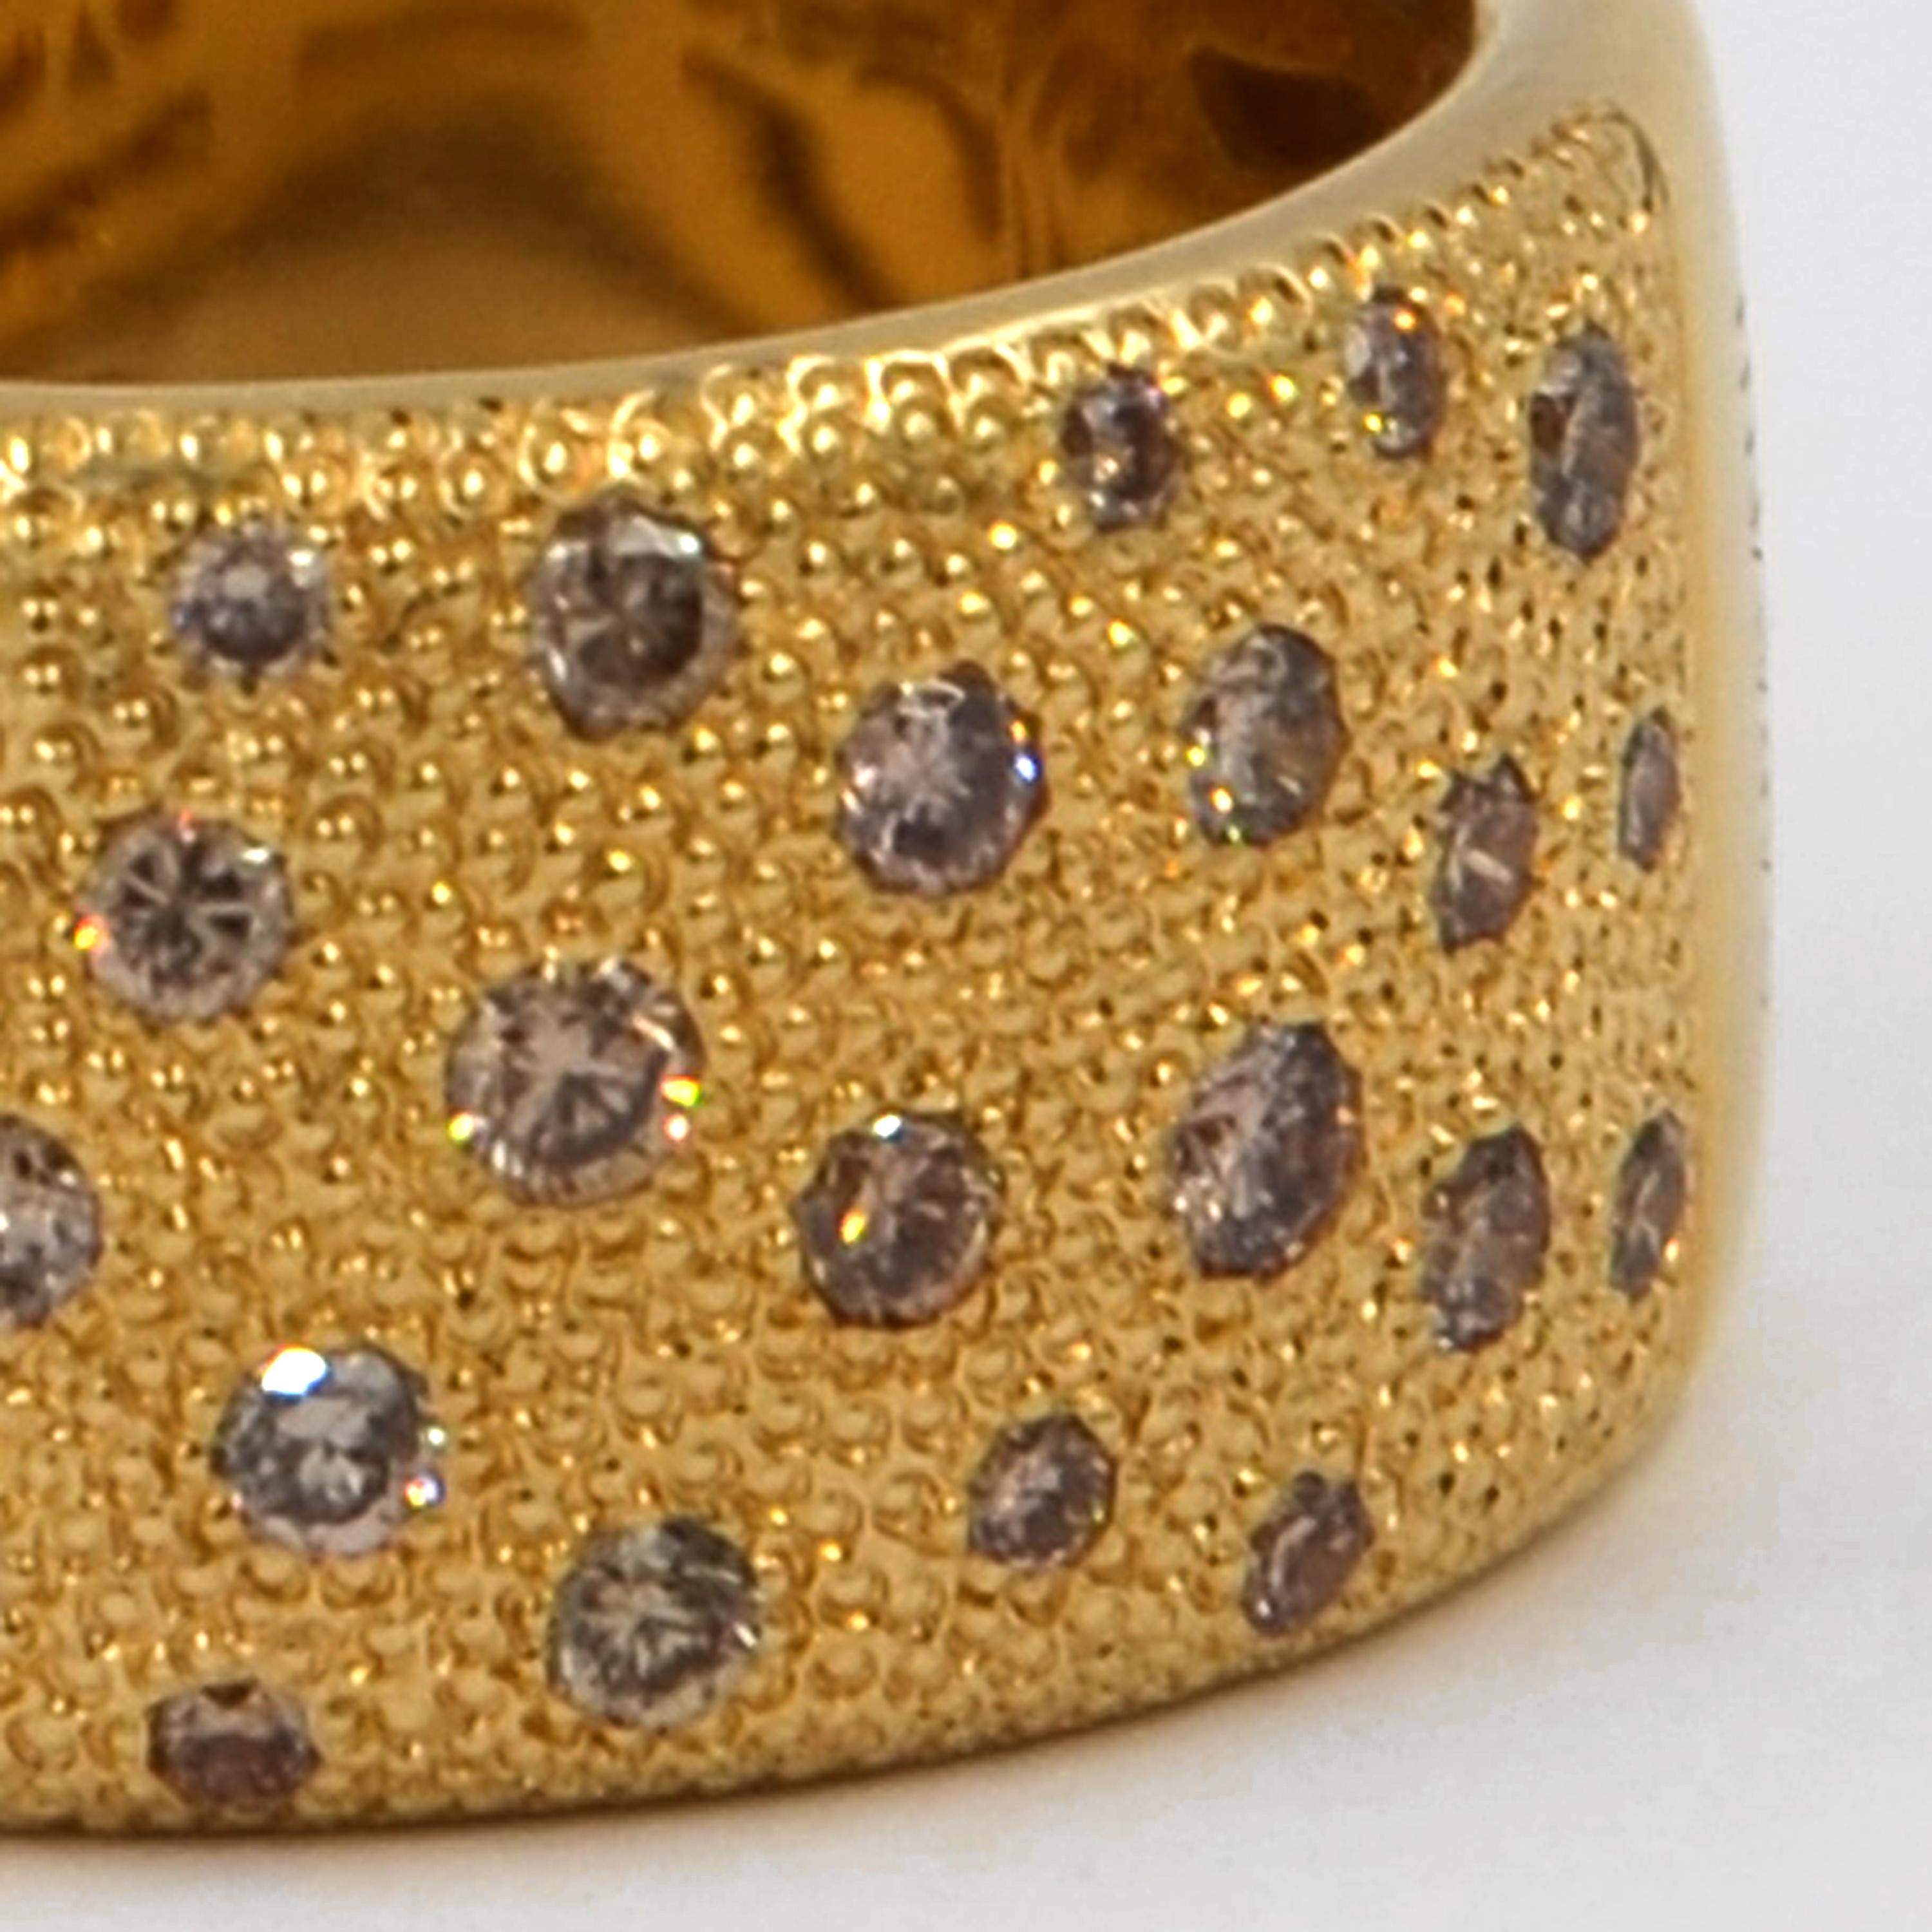 18 Kt Yellow Gold Brown Diamons Garavelli Flat Band Ring , with scattered stones on a hand hammered gold surface.
Finger  size 56
GOLD  : 16.20
BROWN DIAMONDS ct : 0.96
